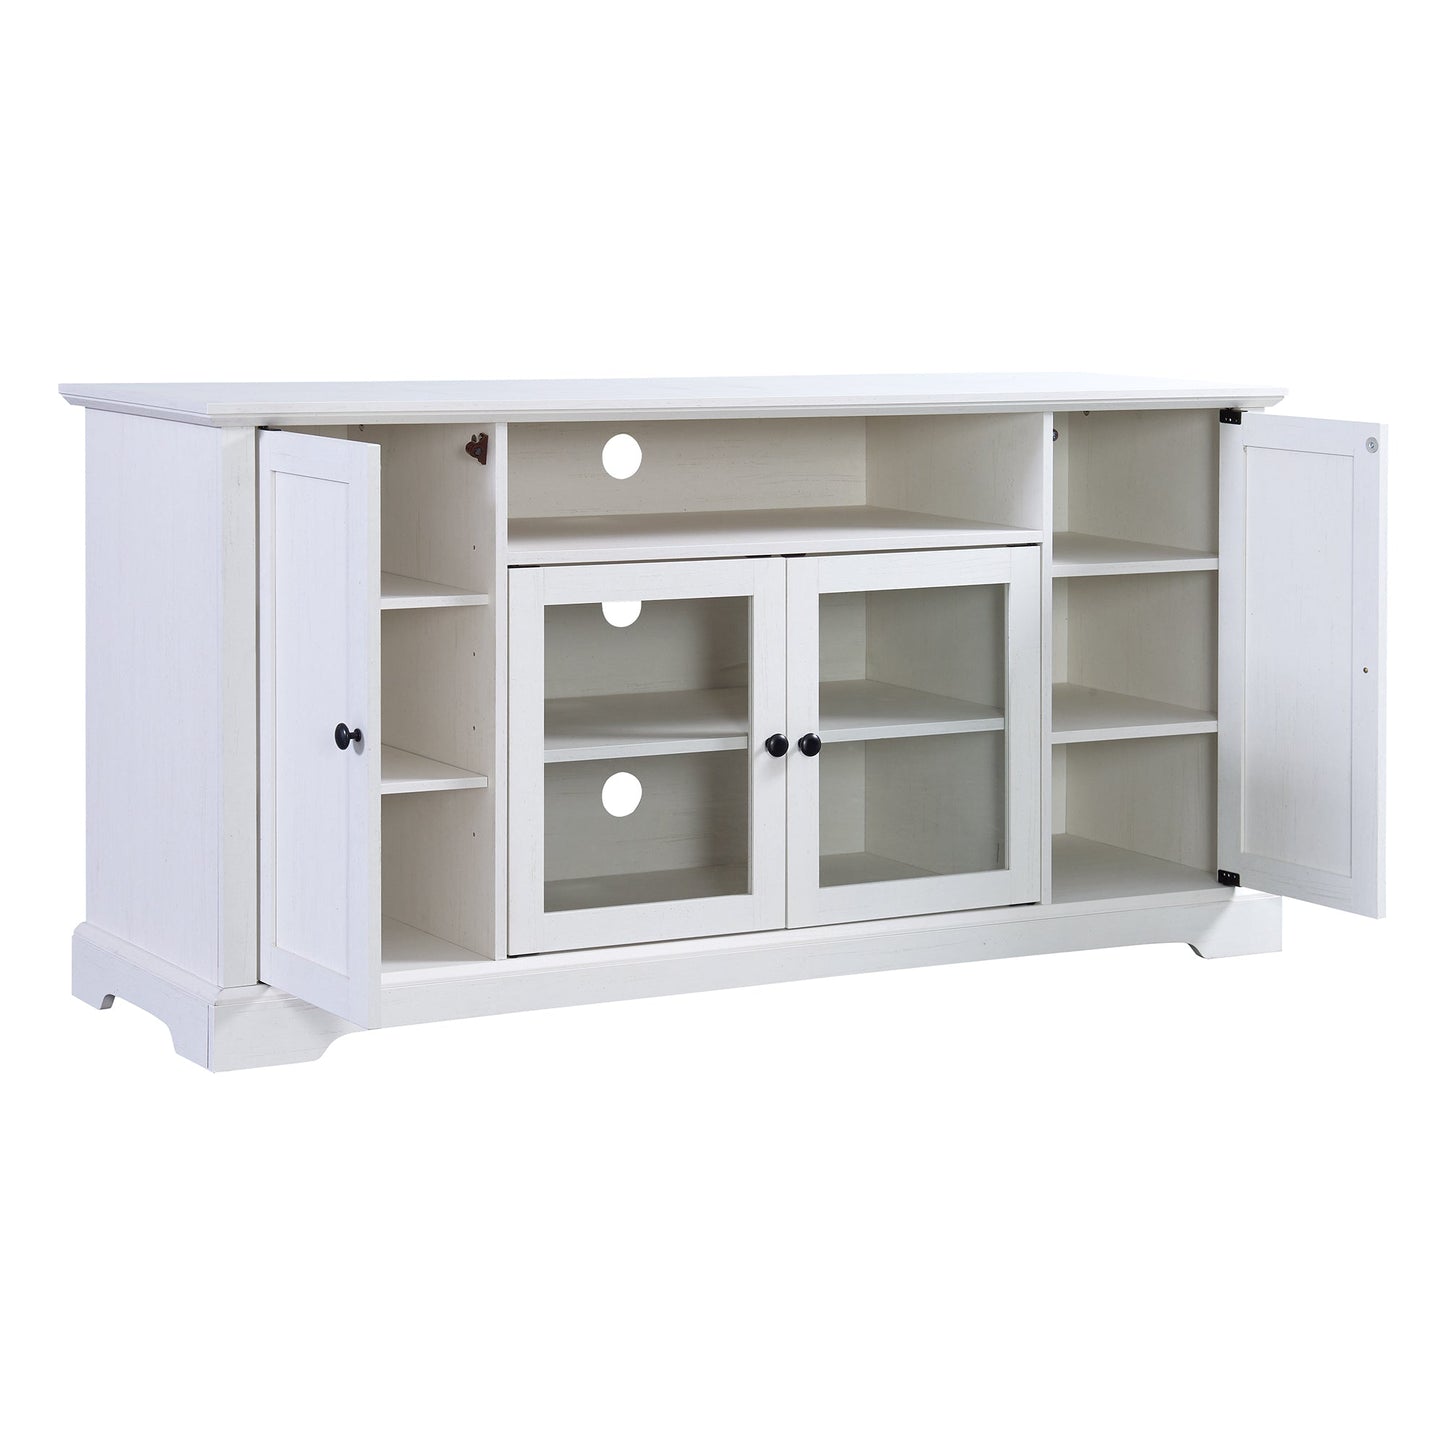 Ravenna White TV Stand for TV up to 65 in Open Style Cabinet Sideboard